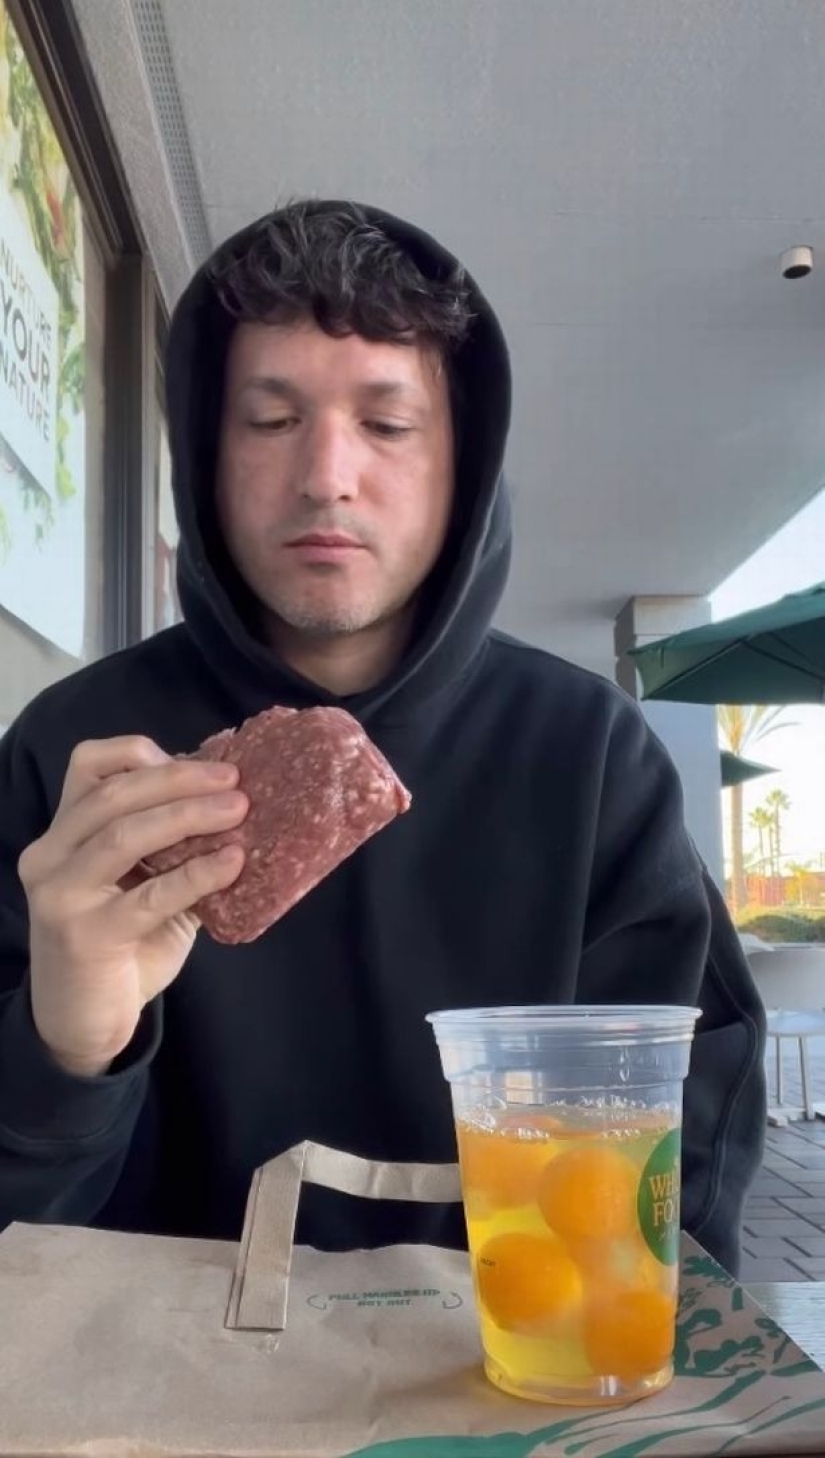 An American eats only raw meat to see if he "survives"